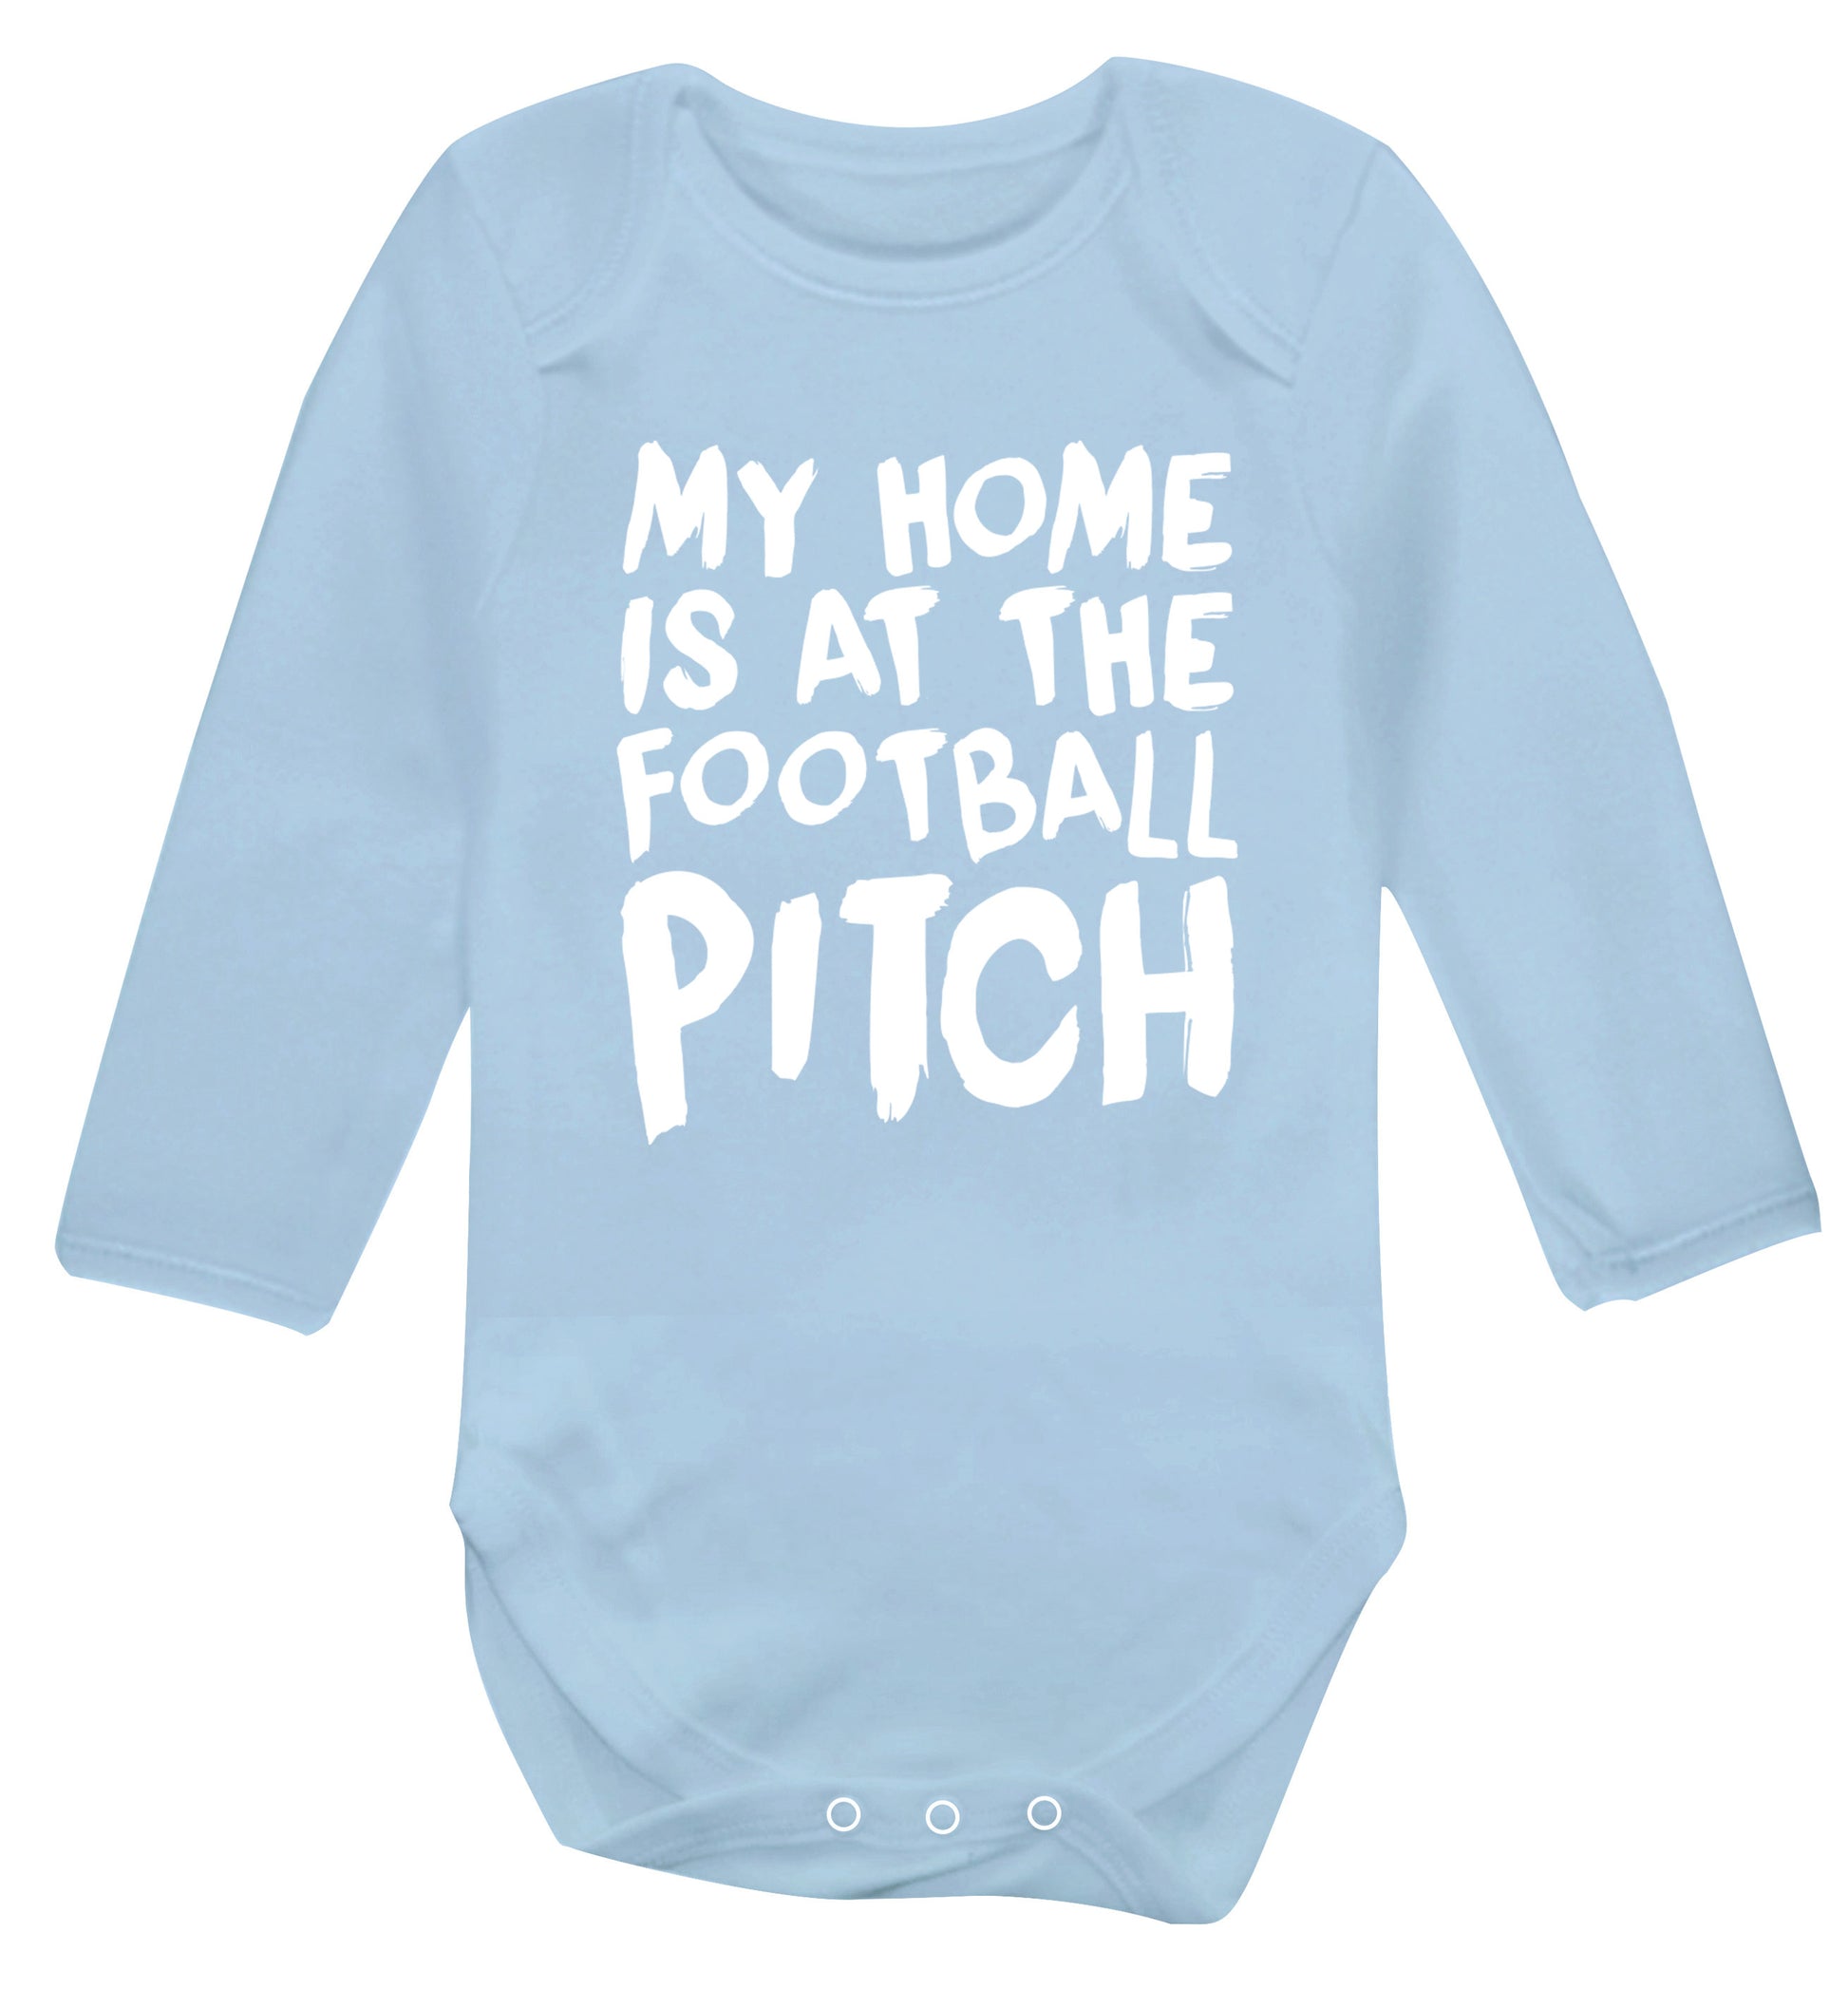 My home is at the football pitch Baby Vest long sleeved pale blue 6-12 months